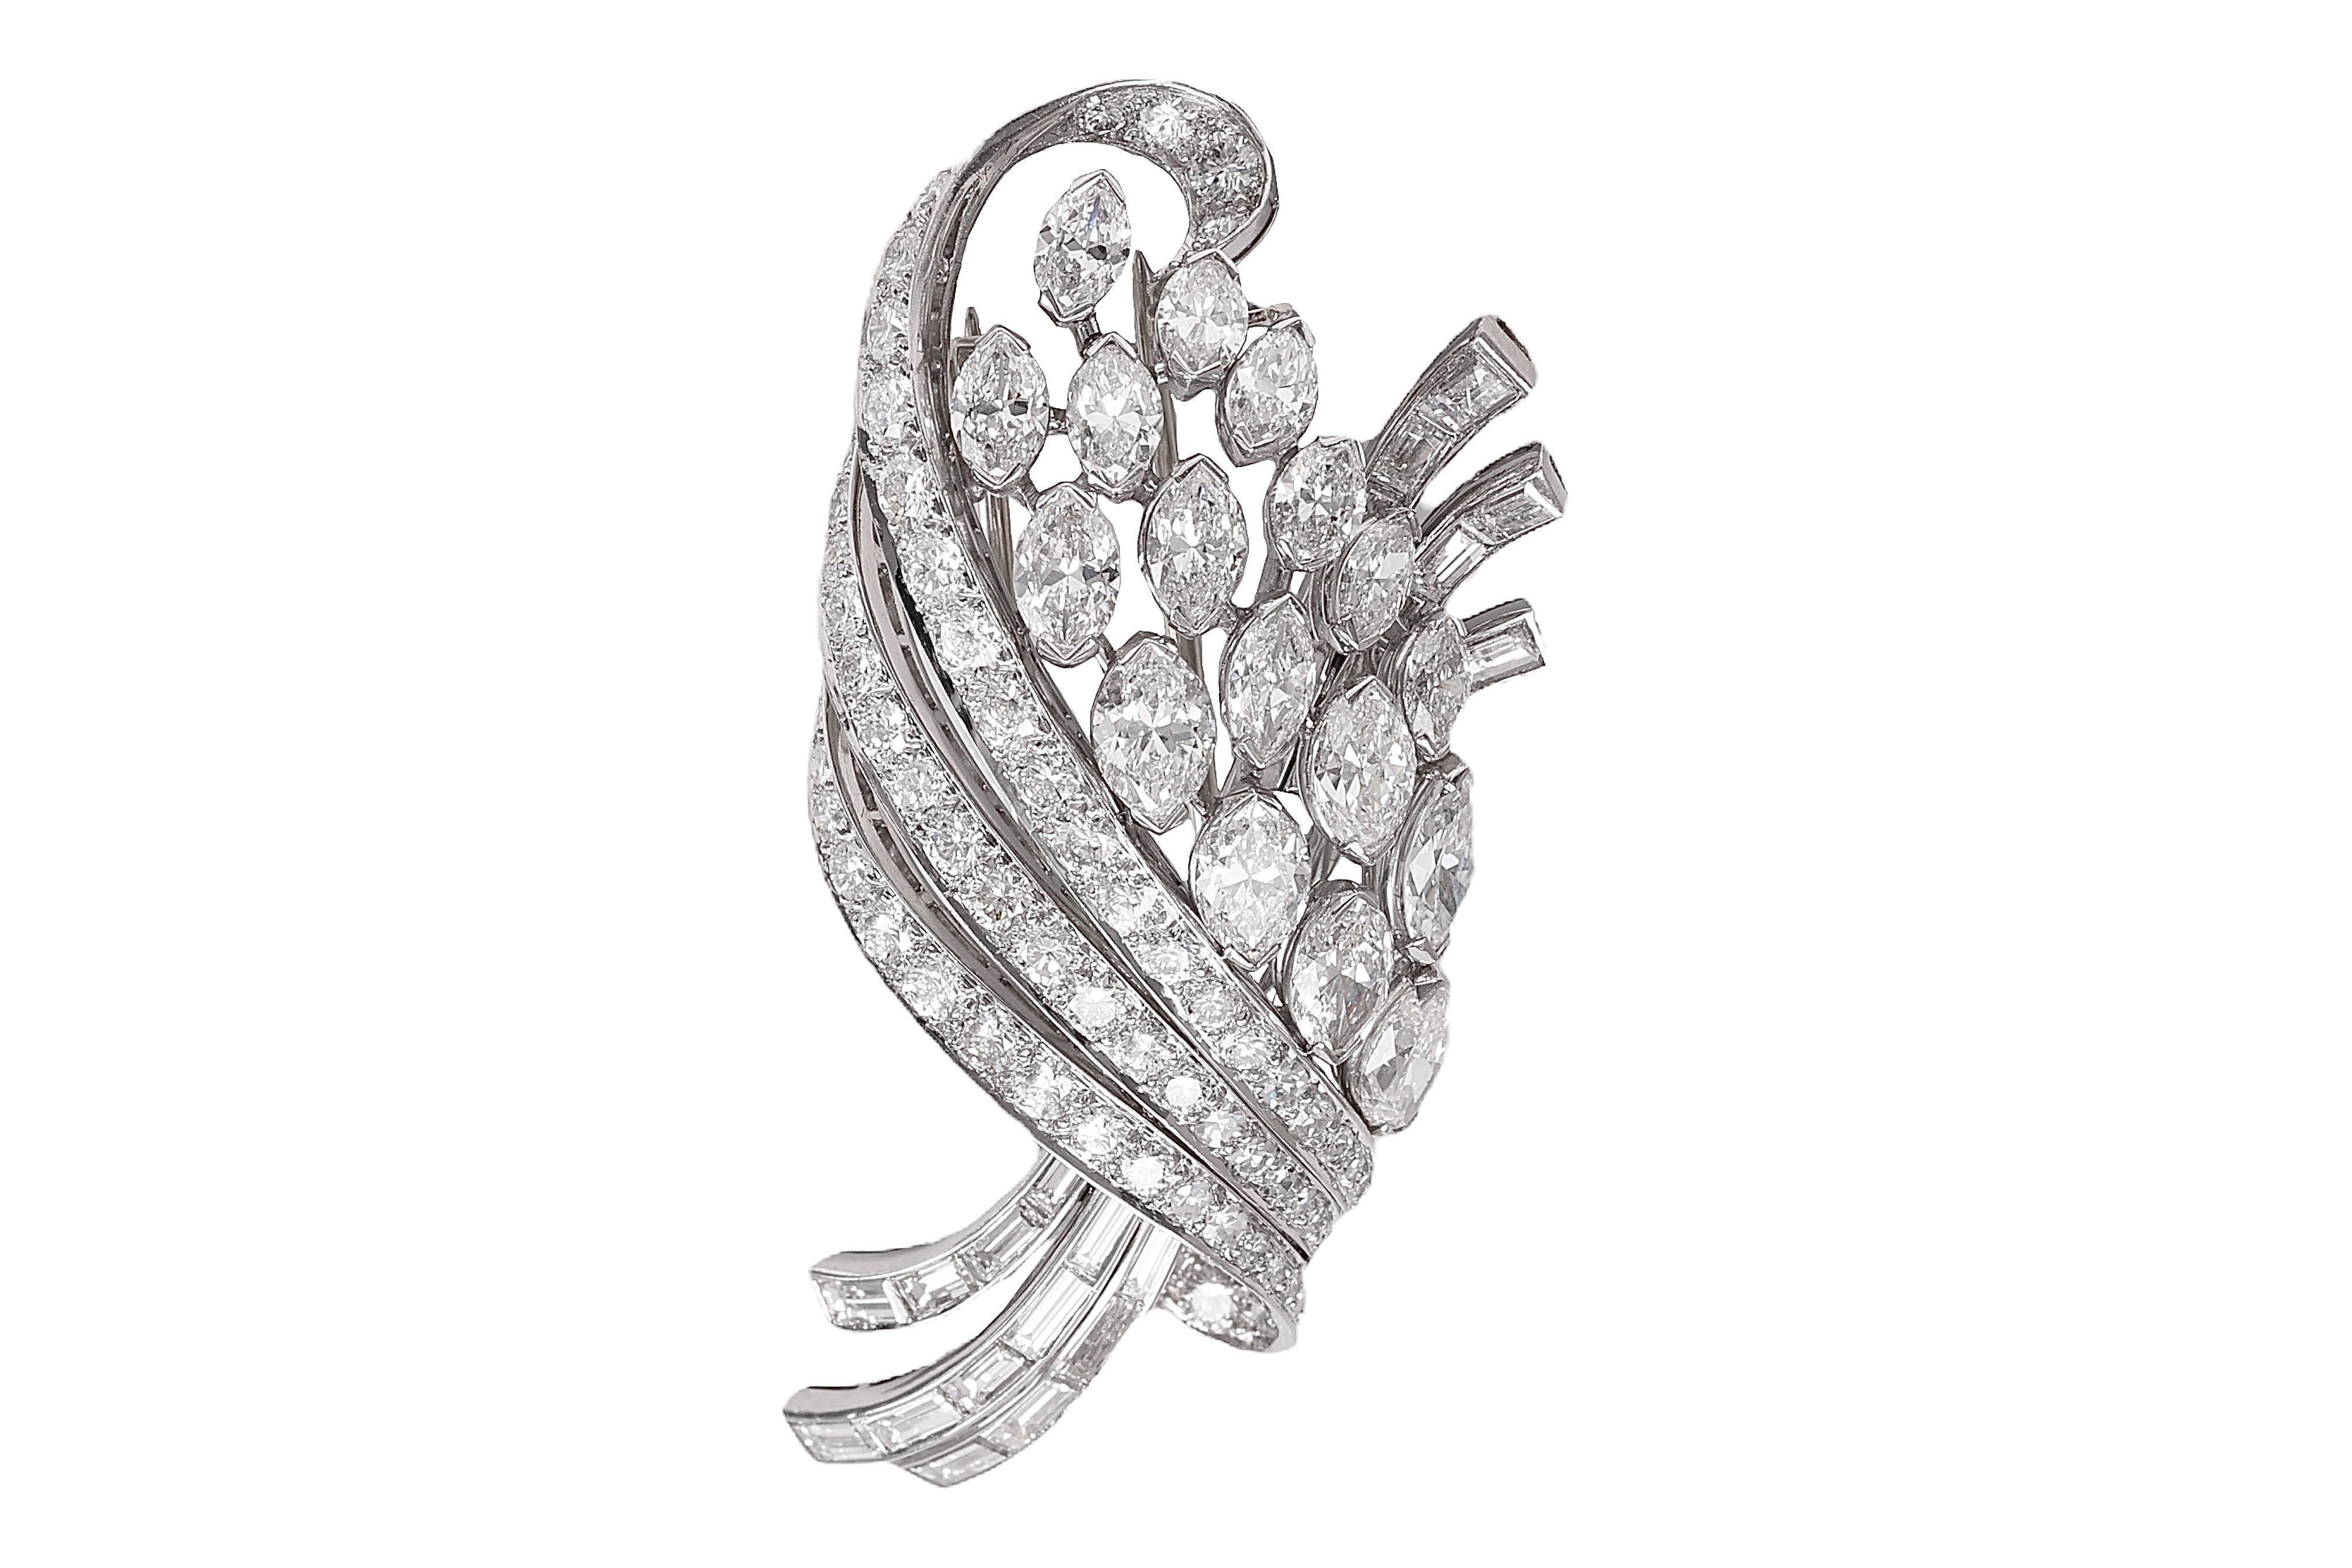 
Description : Platinum Brooch Depicting Bouquet Flowers with approx. 11.7 ct. Diamonds from Estate Sultan of Oman Qaboos Bin Said

Completely hand made and set with the most beautiful diamonds !

Diamonds
Marquise Cut : approx. 5.2 ct.
Baguette Cut